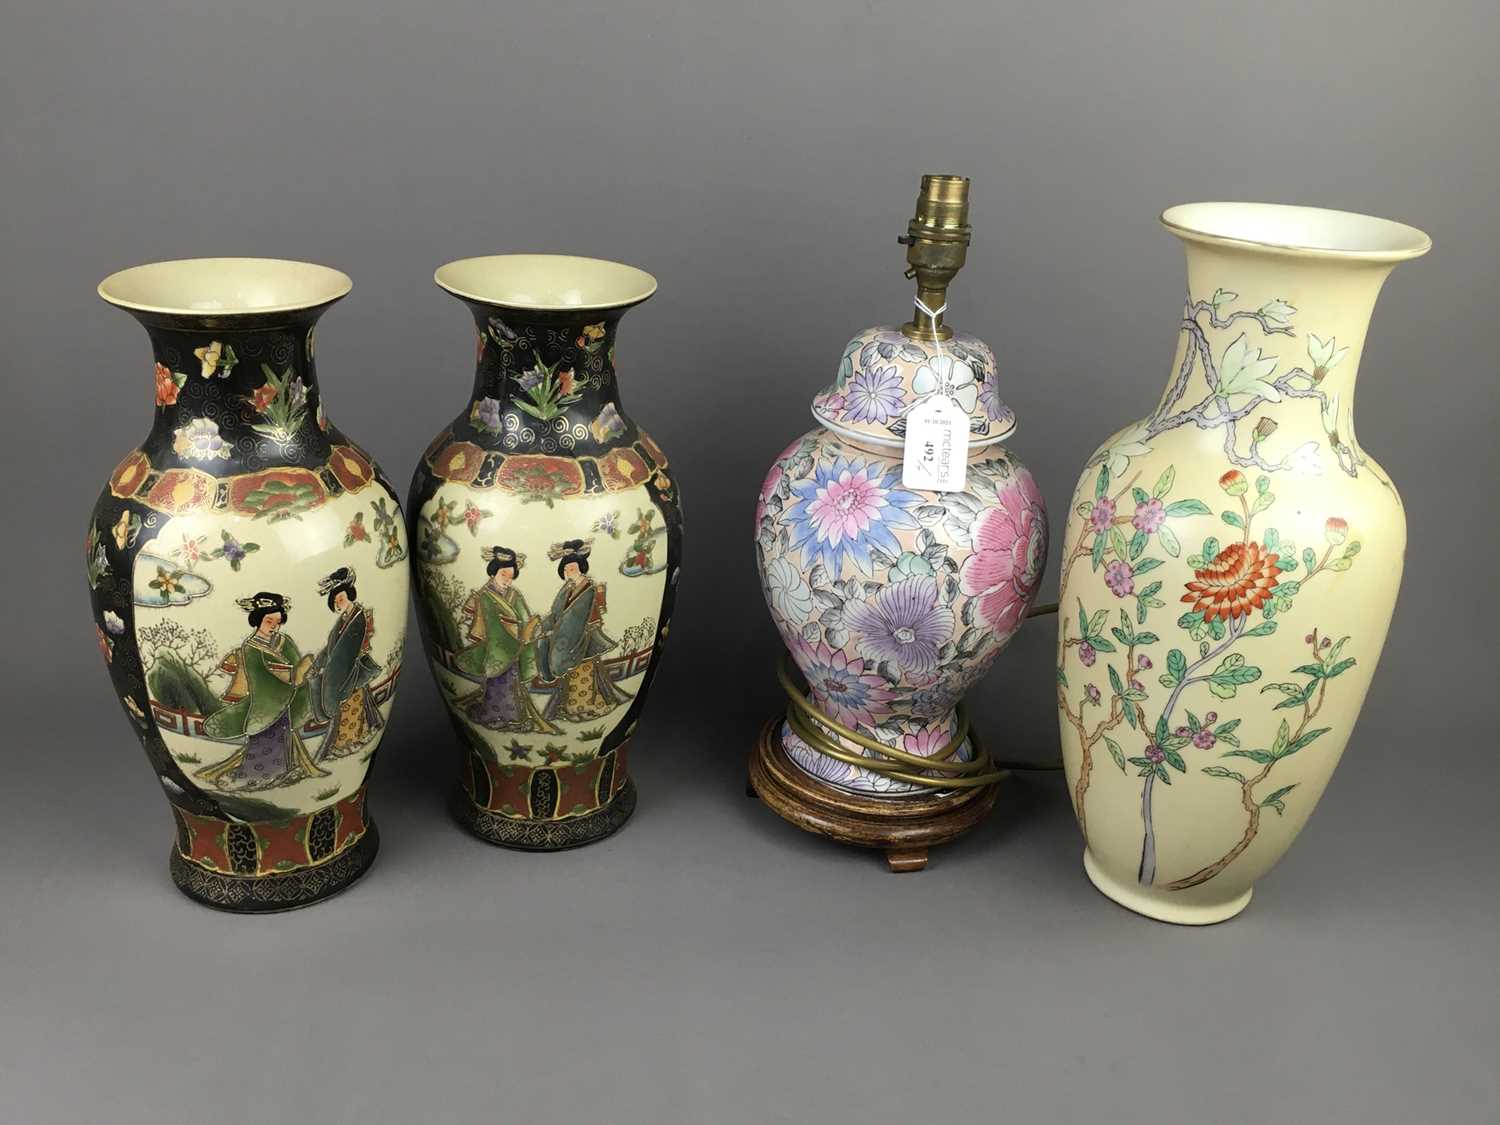 A LOT OF THREE VASES ALONG WITH A LAMP